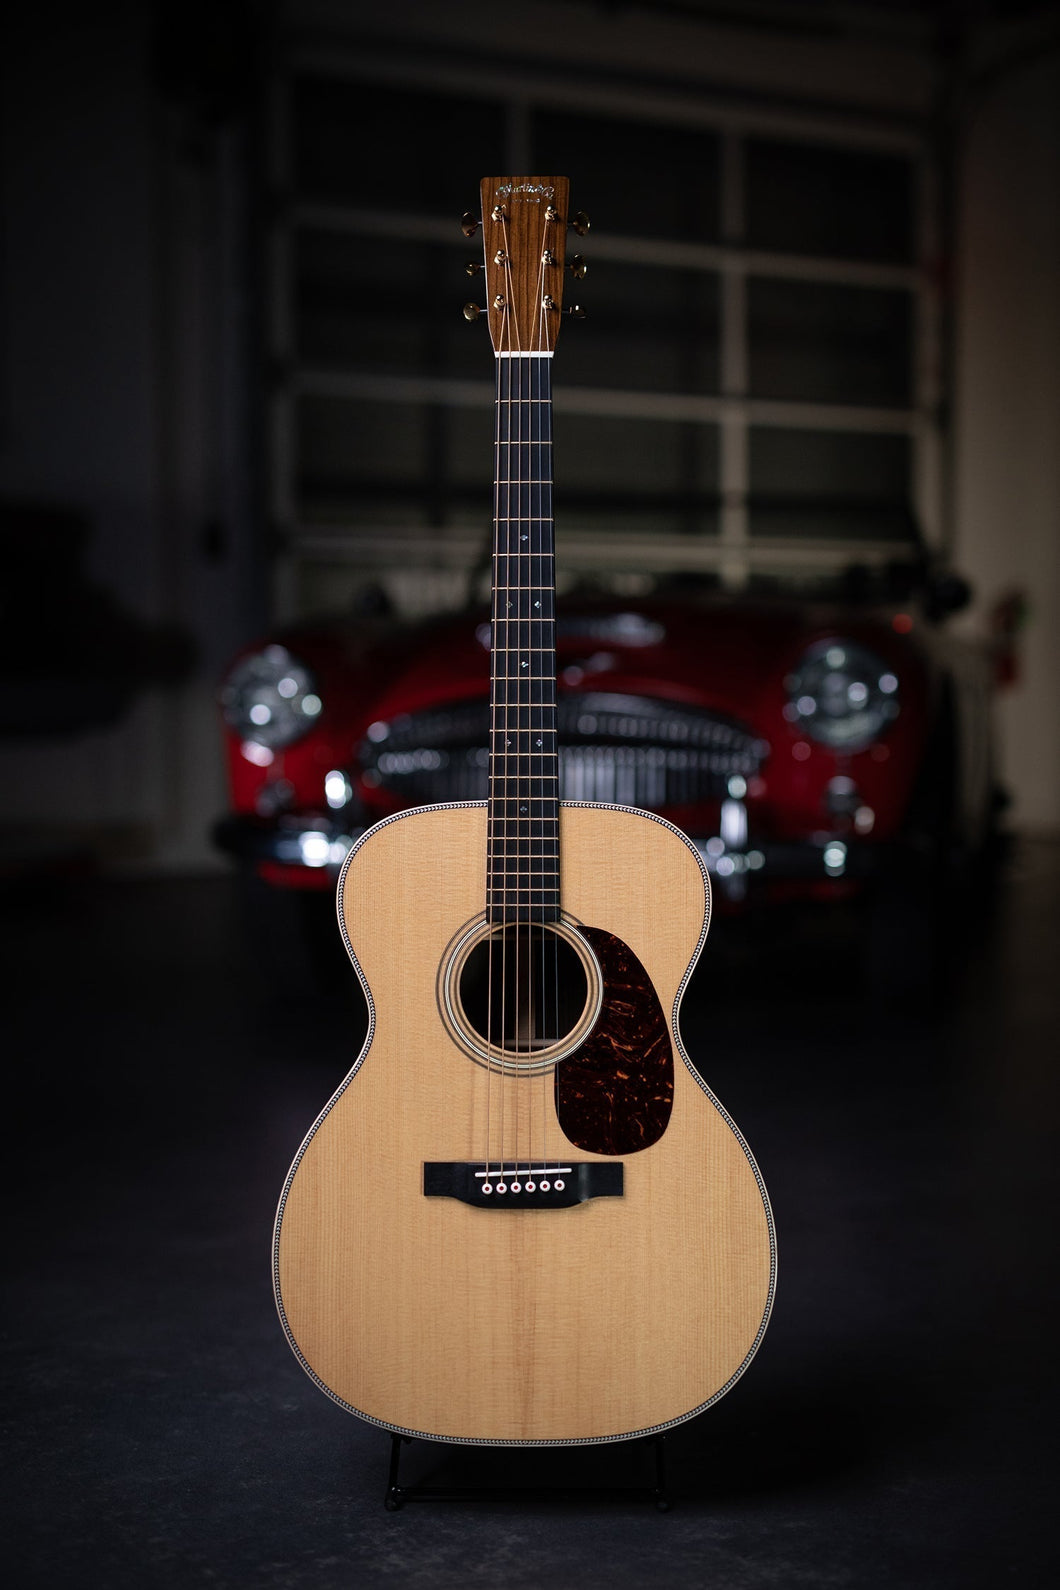 Martin 000-28 Modern Deluxe Acoustic Guitar - Natural